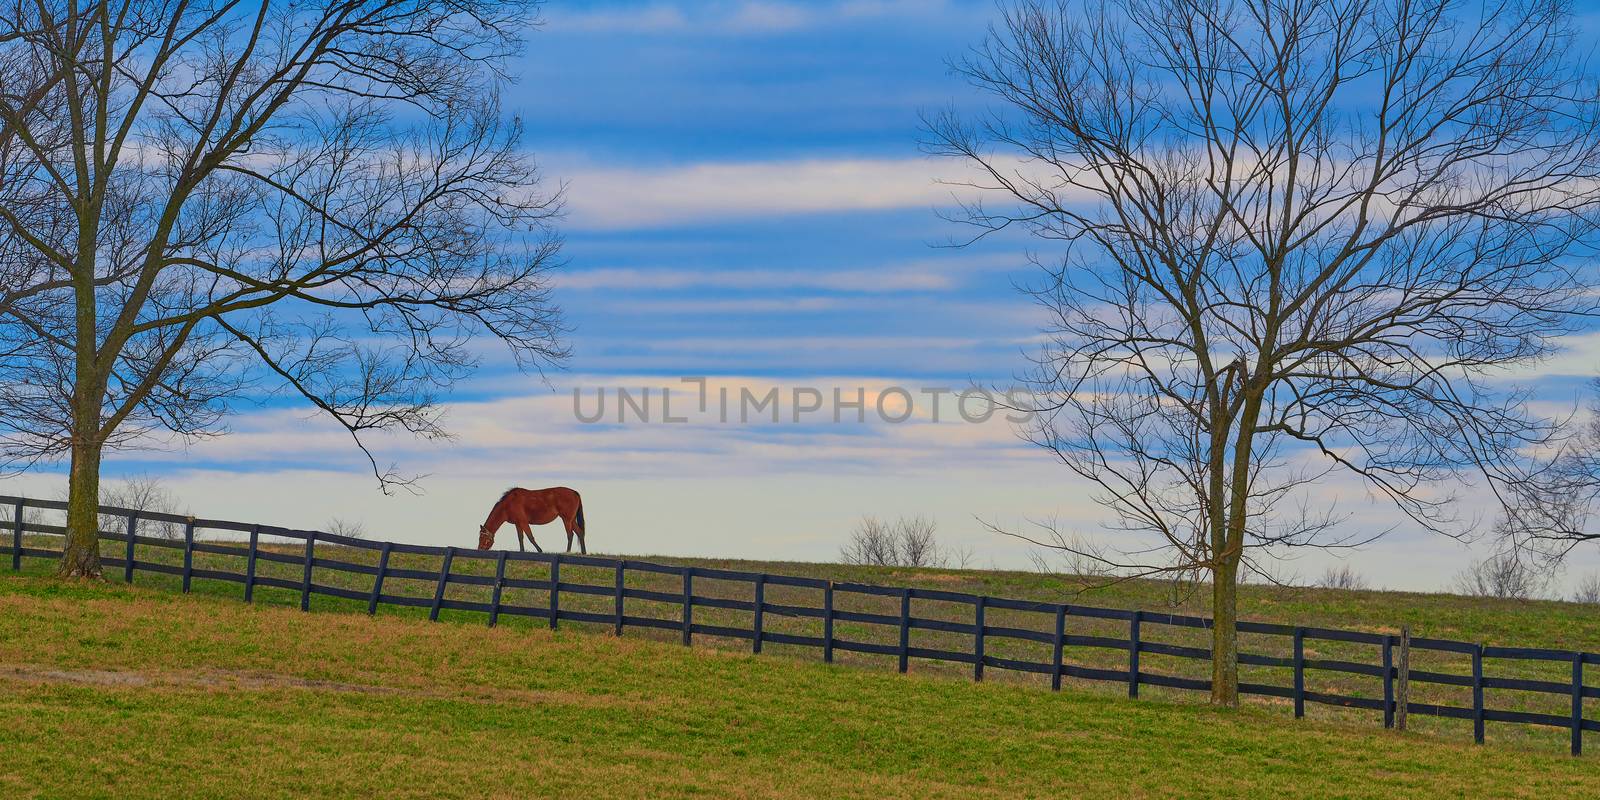 Thoroughbred horse grazing in a field with cloudy skies.